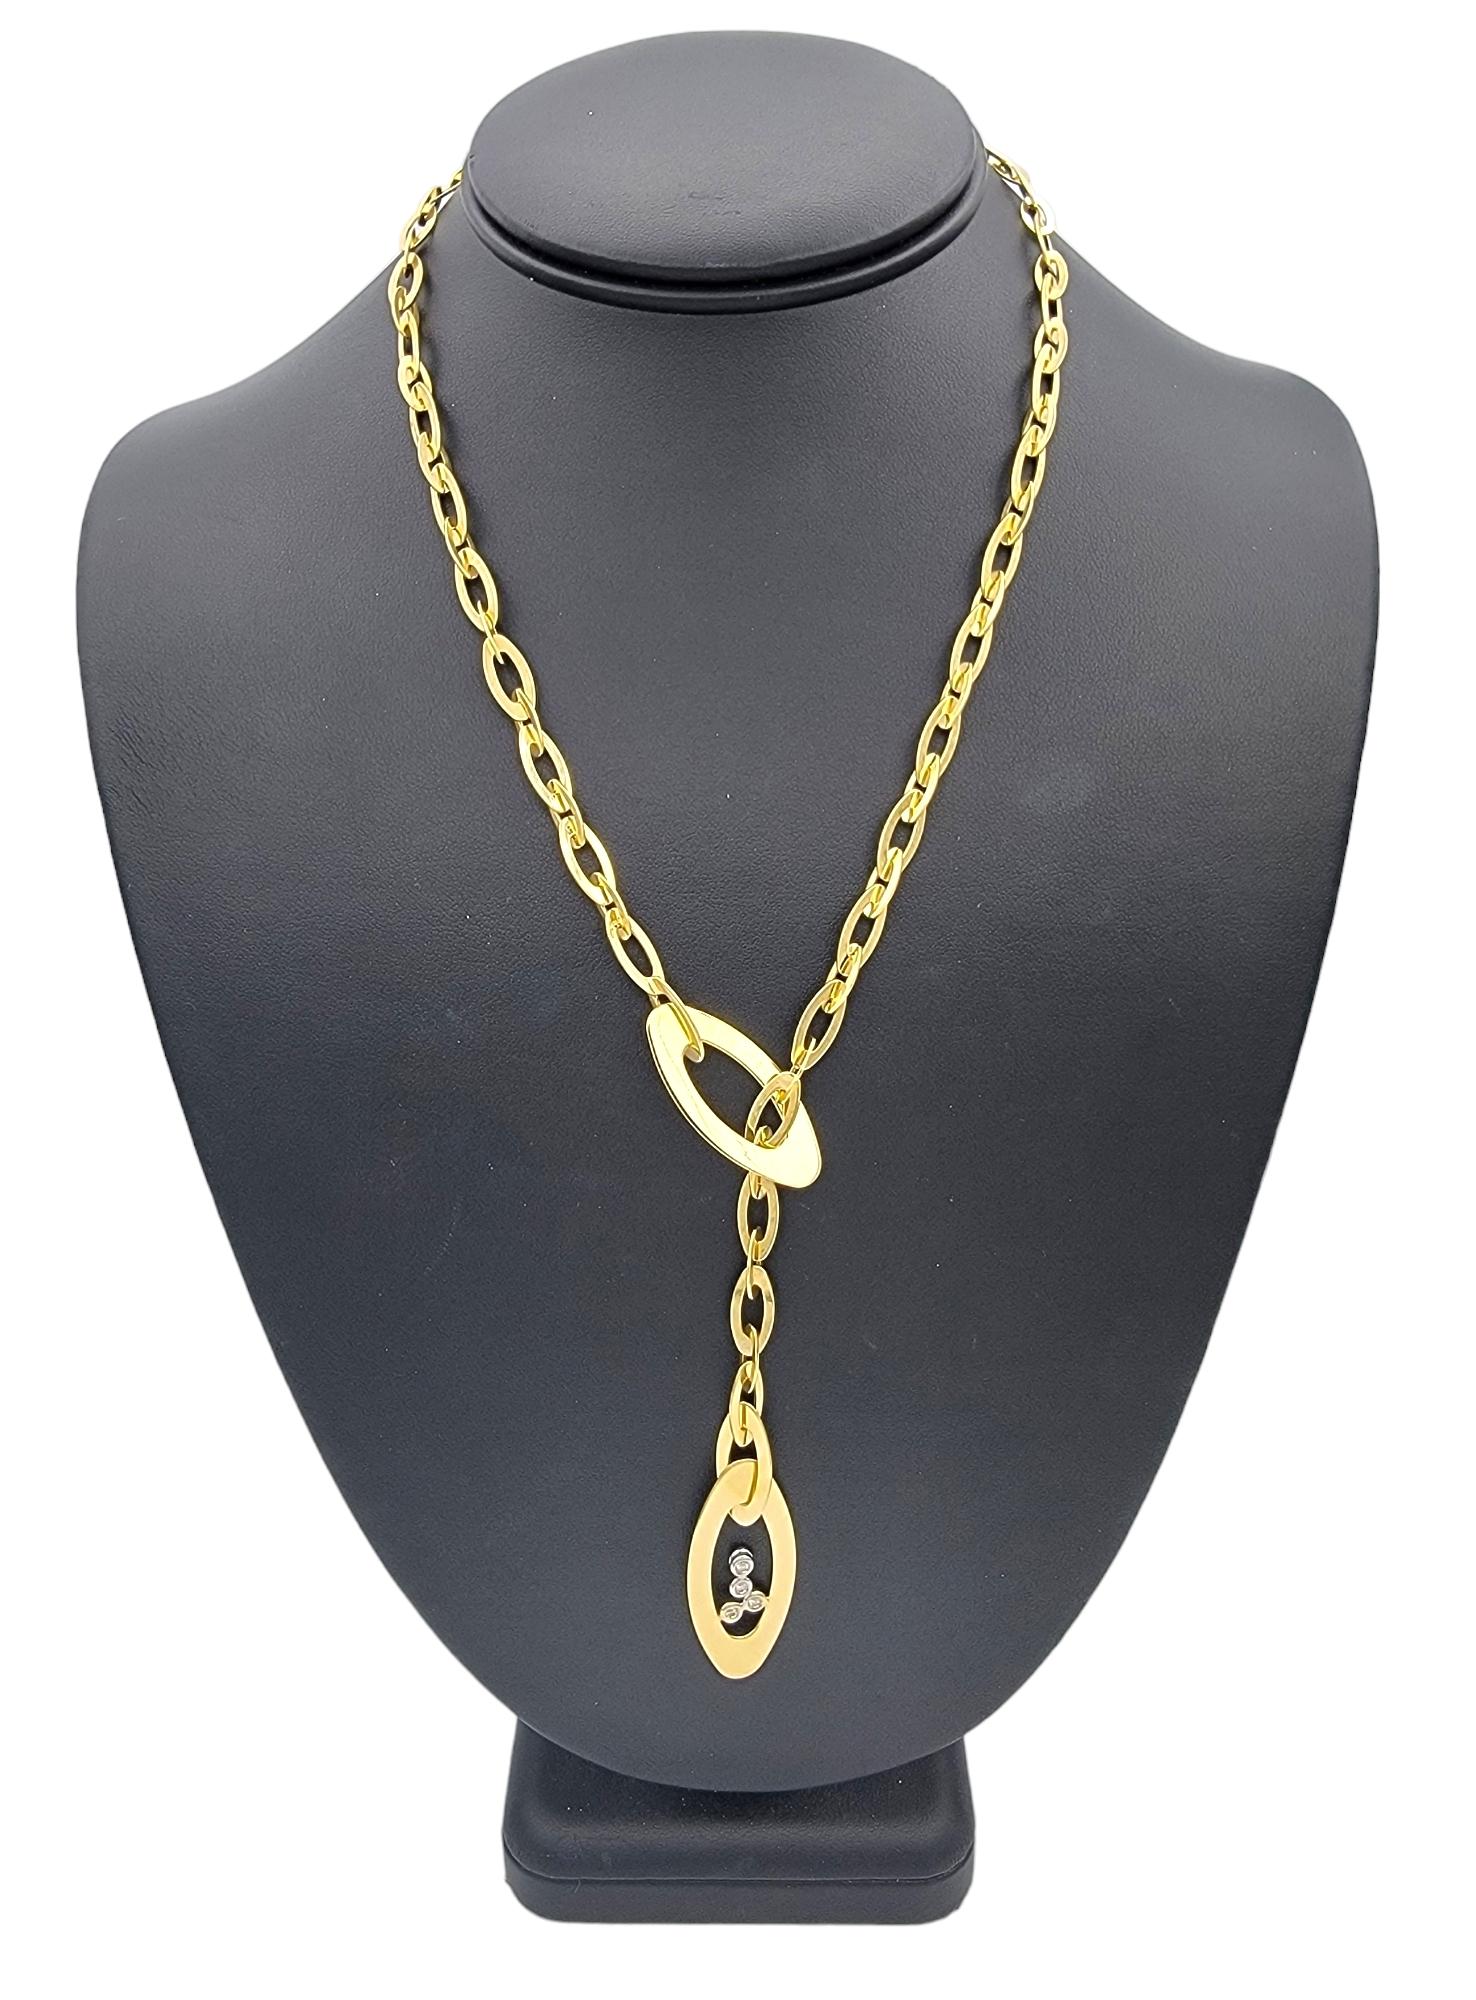 Roberto Coin Chic & Shine Diamond Lariat Style Necklace in 18 Karat Yellow Gold For Sale 2